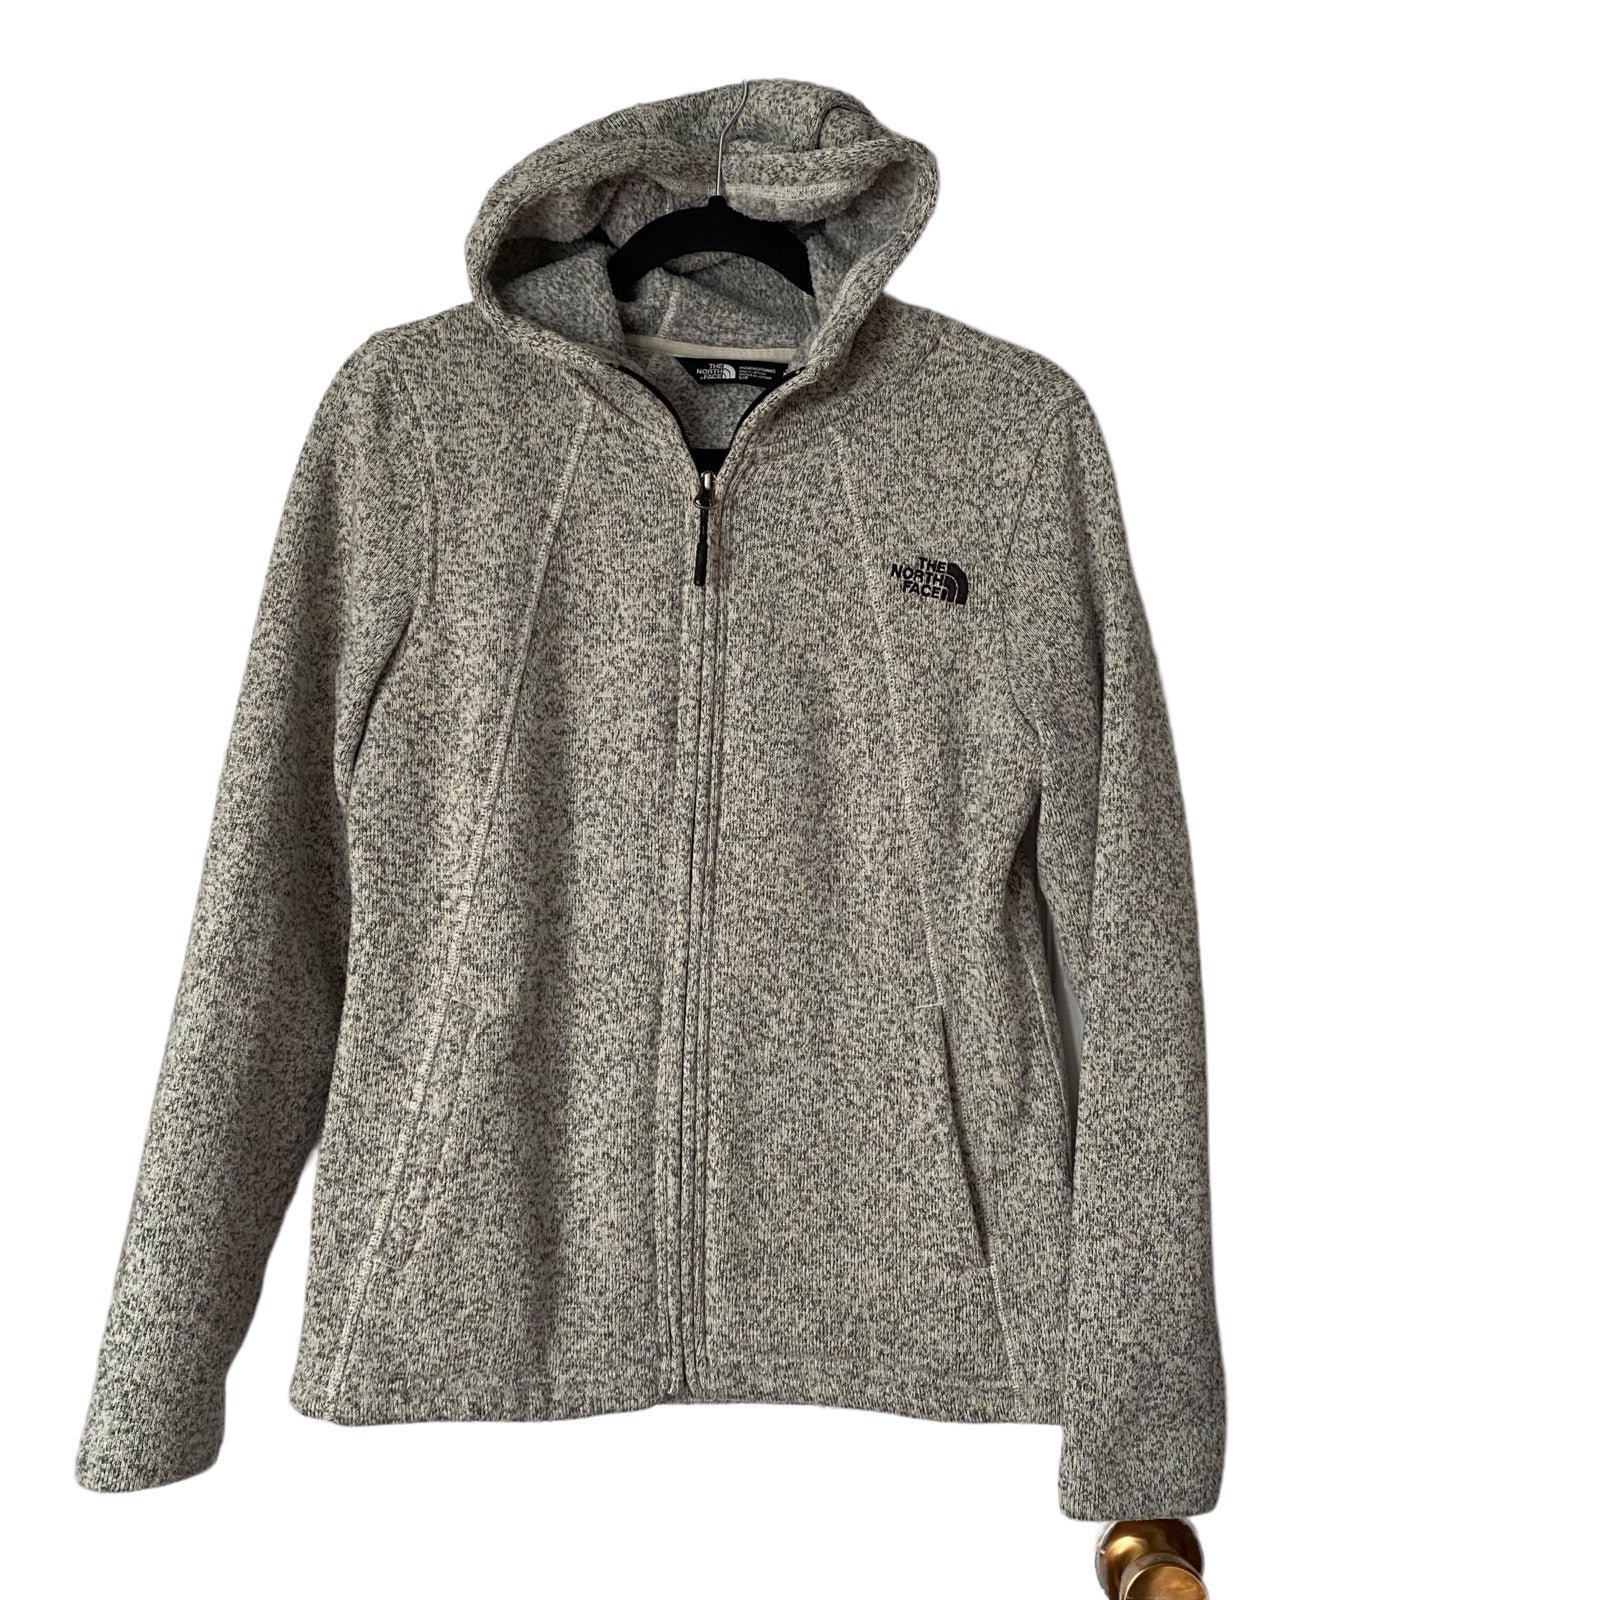 Factory Direct  The North Face knit fleece hooded full zip heather gray jacket Size S/P grmshA1CC Store Online